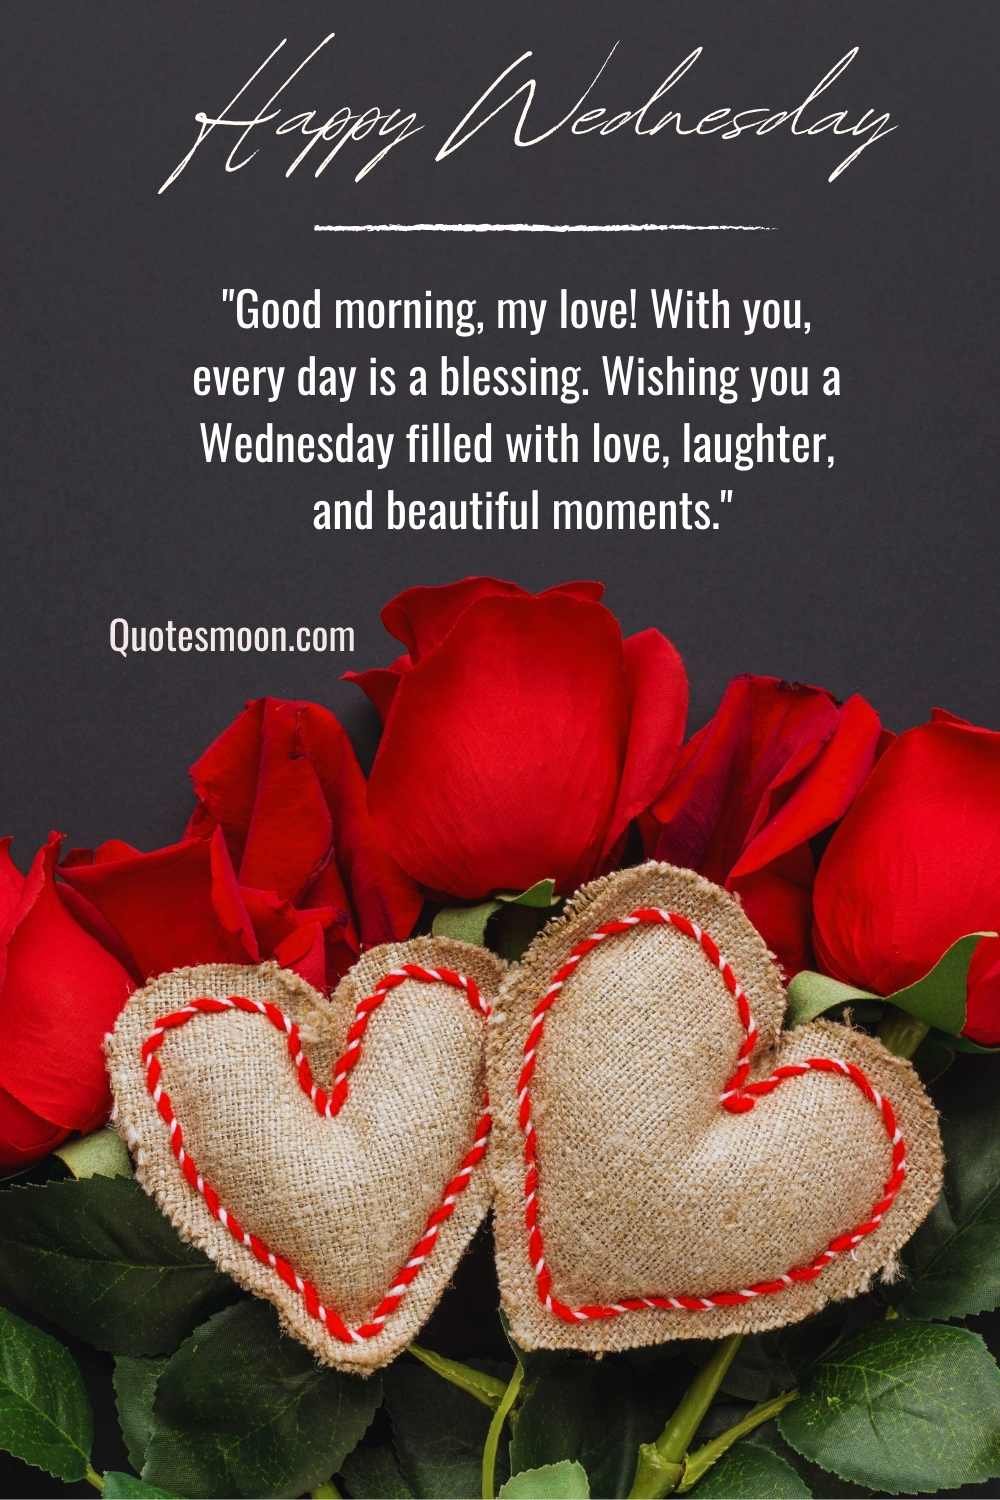 Wednesday Morning Blessings for my love with Images